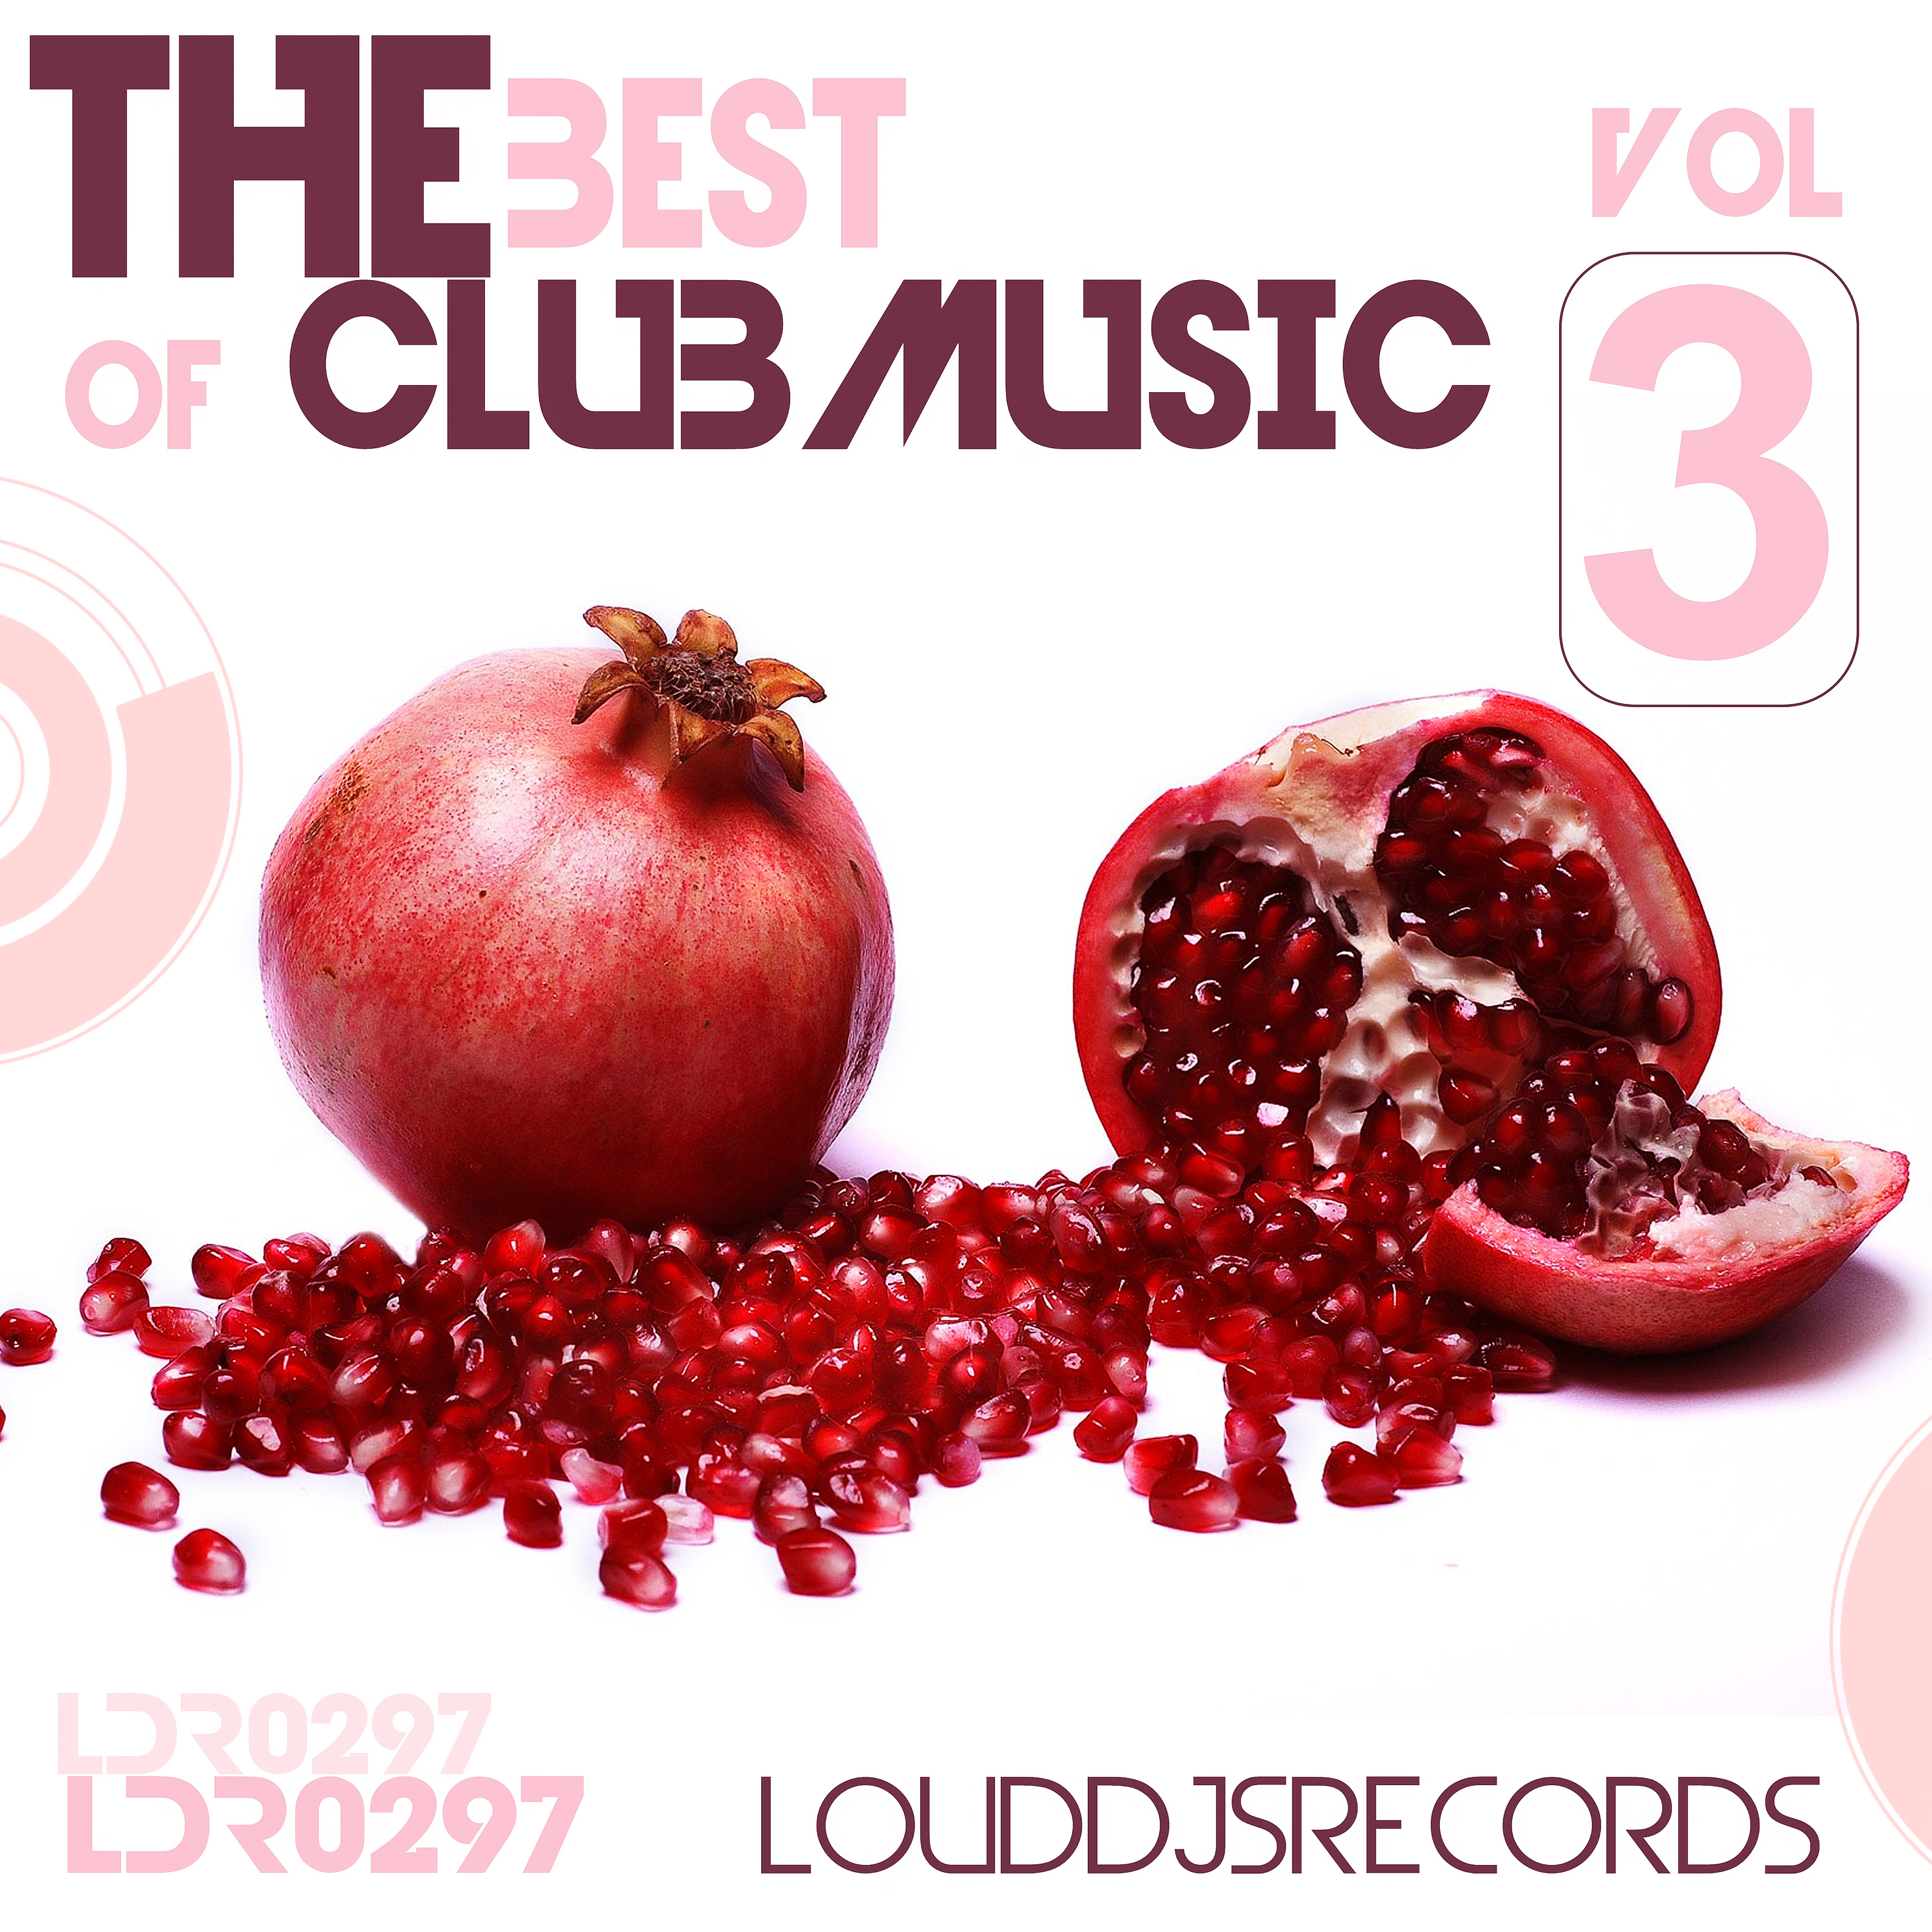 The Best of Club Music, Vol. 3